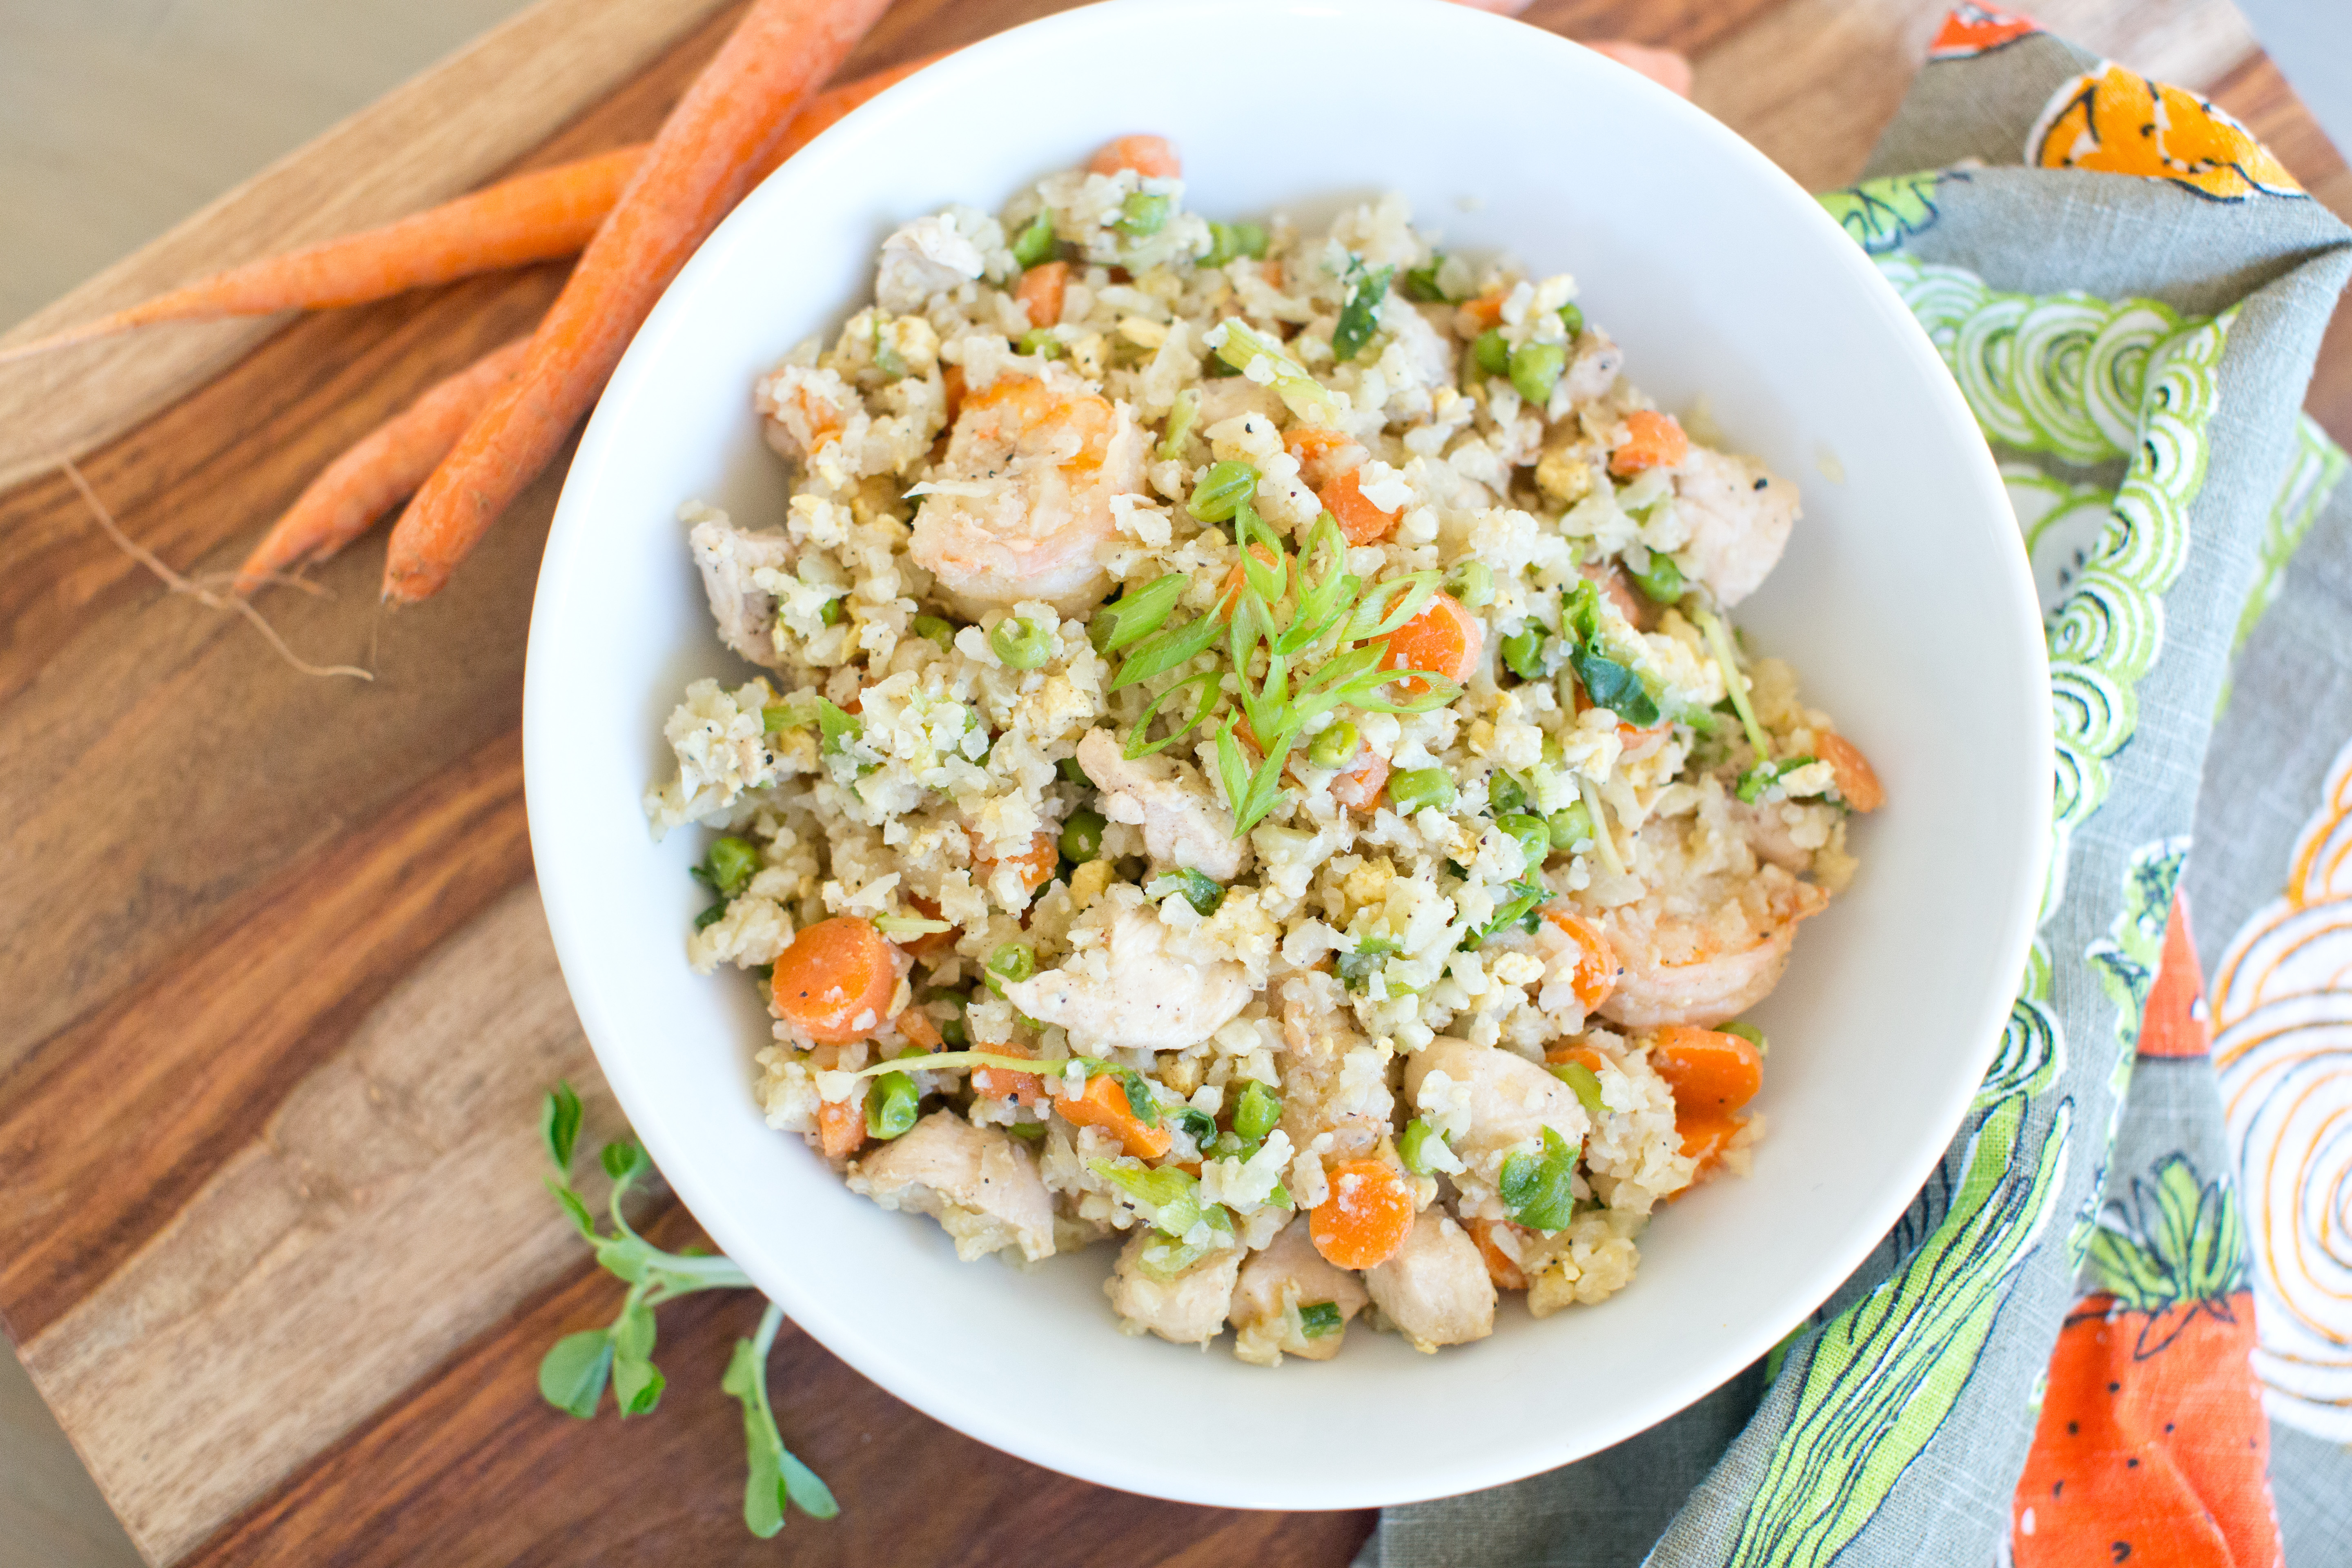 Your favorite chicken and shrimp fried rice with all clean ingredients. Paleo approved! Click through for full recipe on https://bewellbymadison.com!